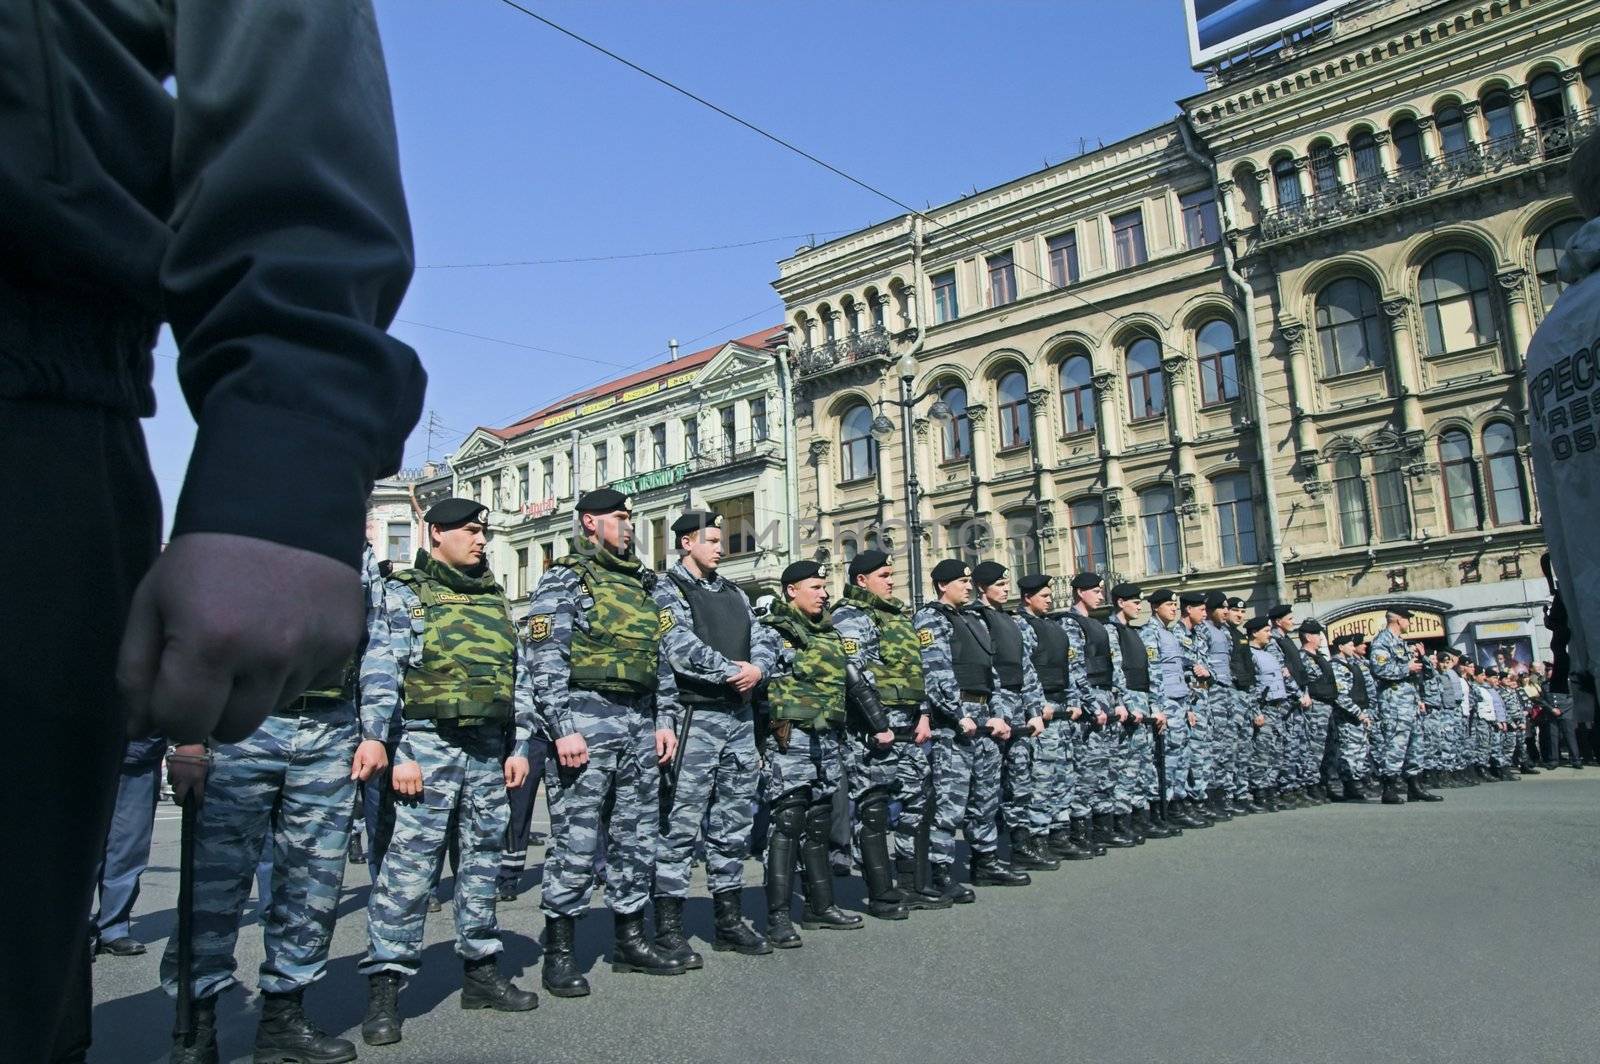 ST PETERSBURG - MAY 1: Police officers lined to keep order during opposition protest rallies May 1, 2008, in St Petersburg, Russia.